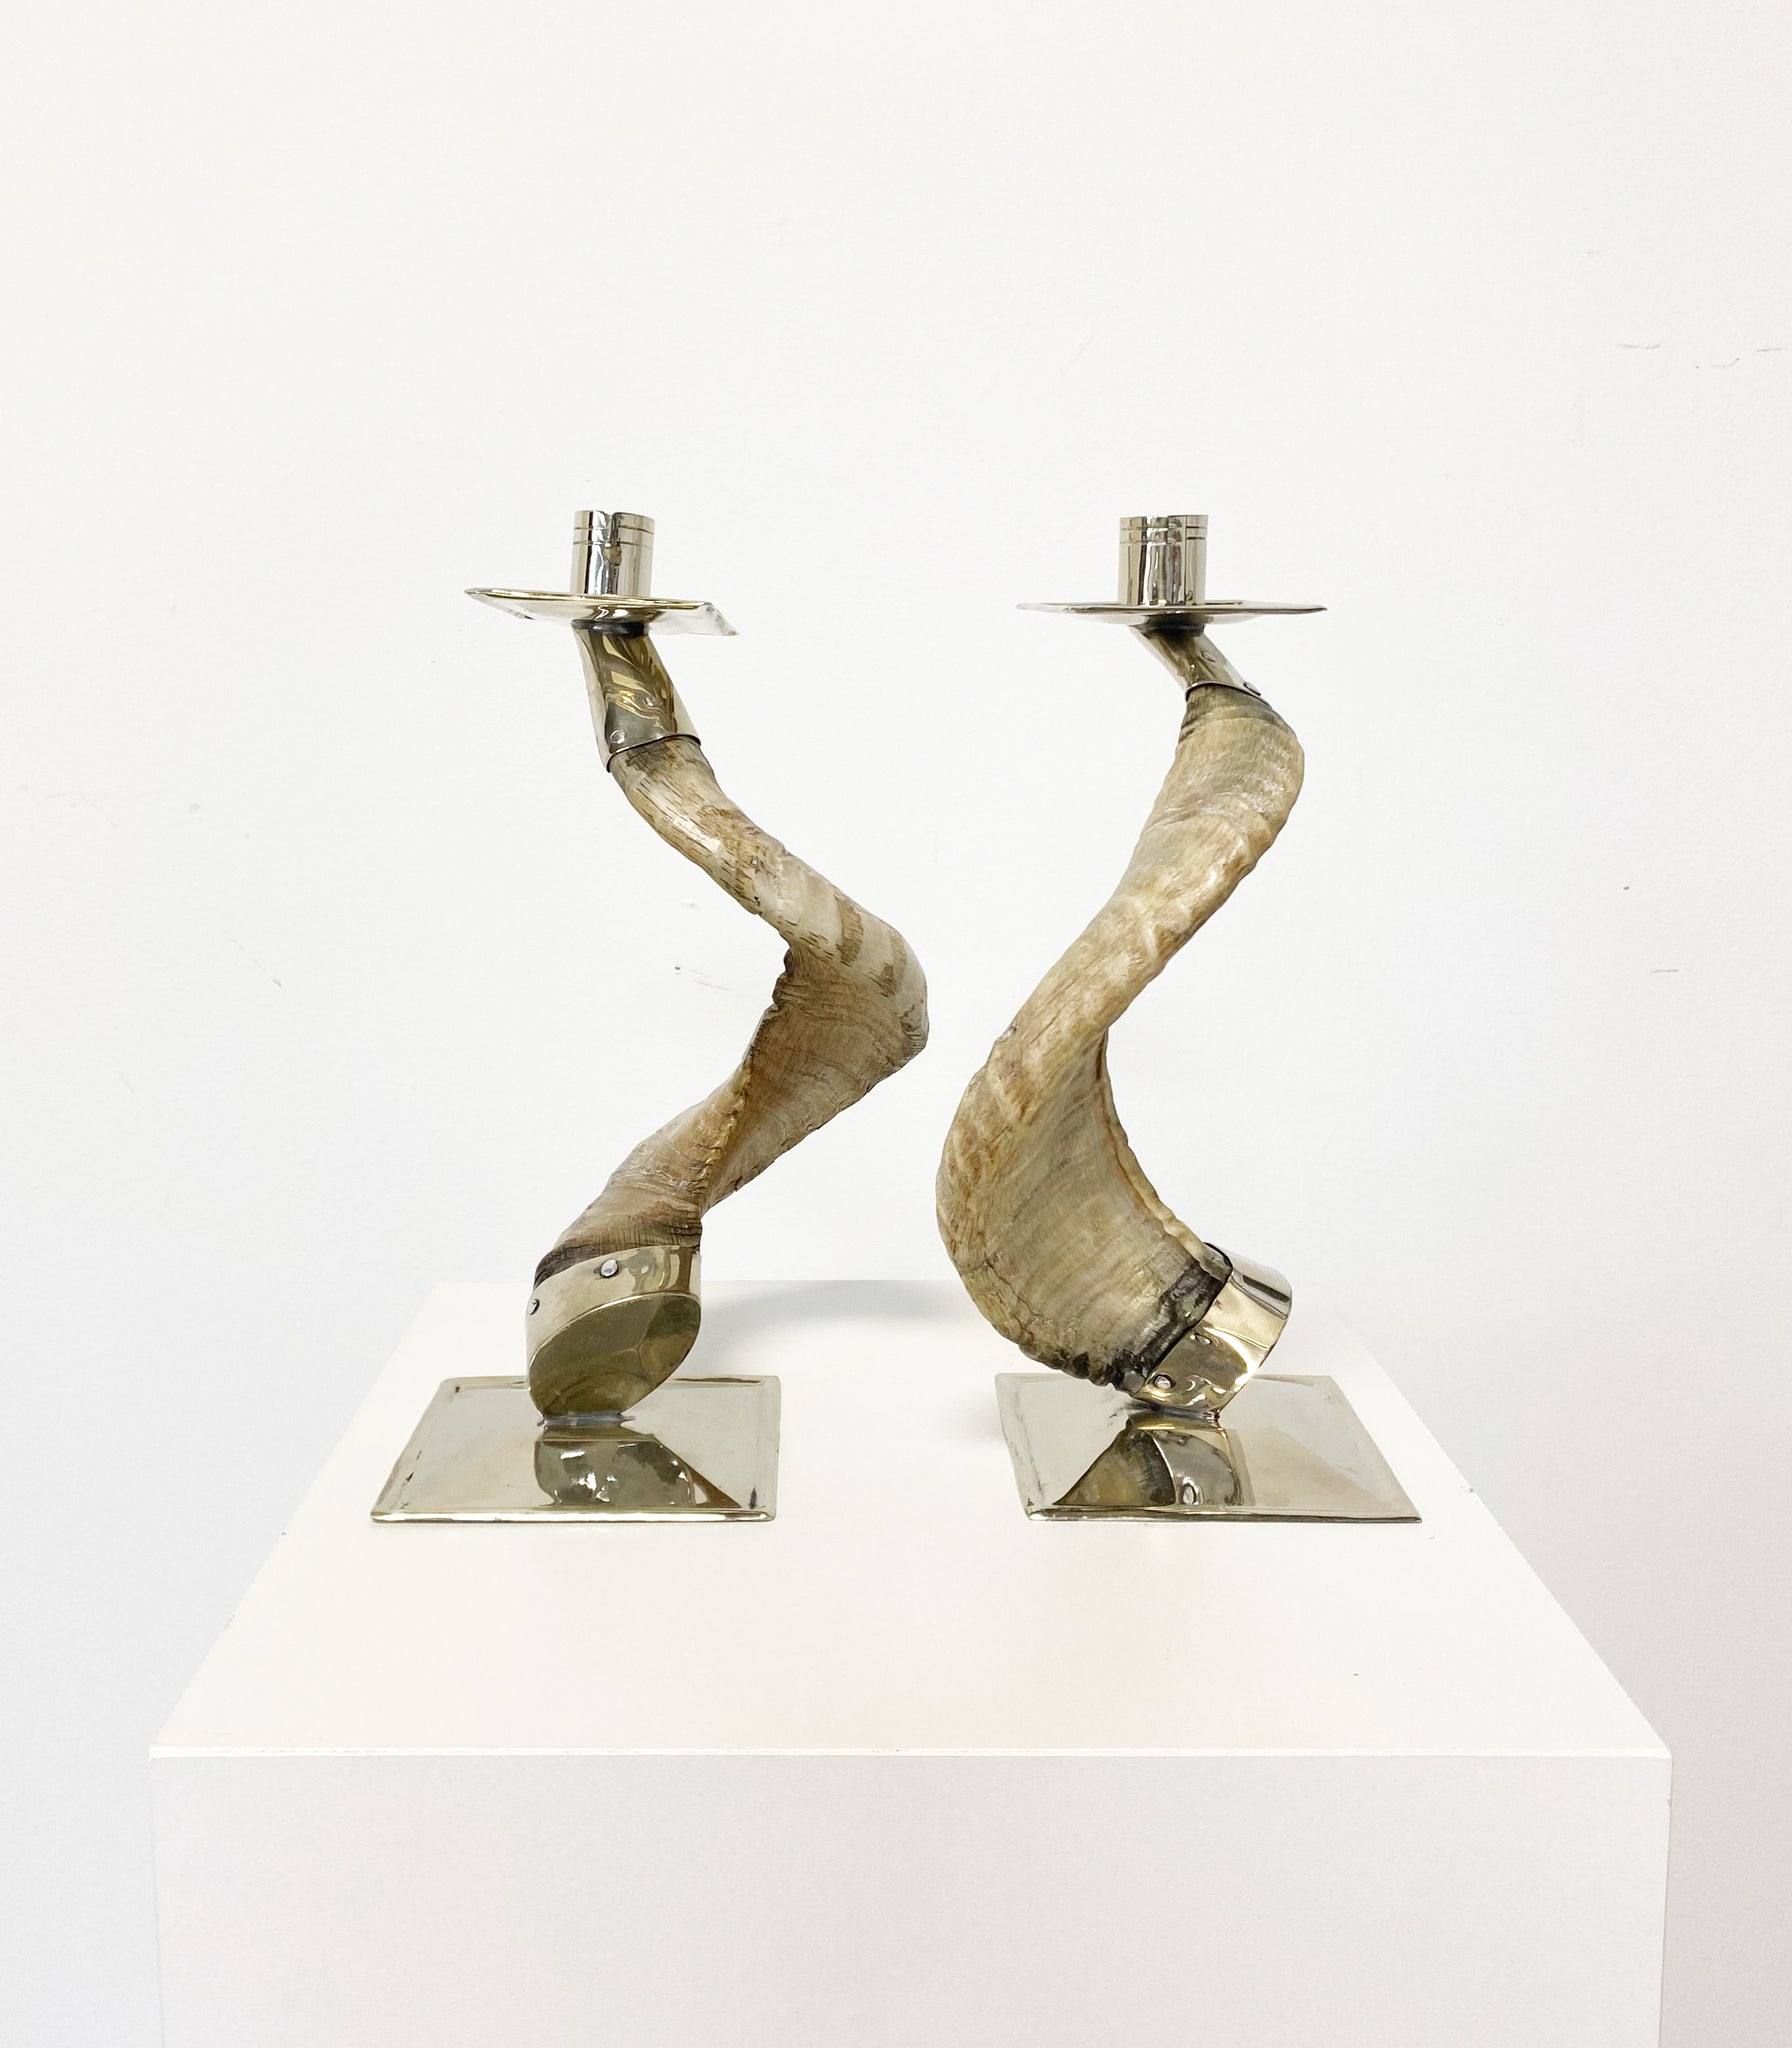 Horn and Silver Candlesticks, Pair